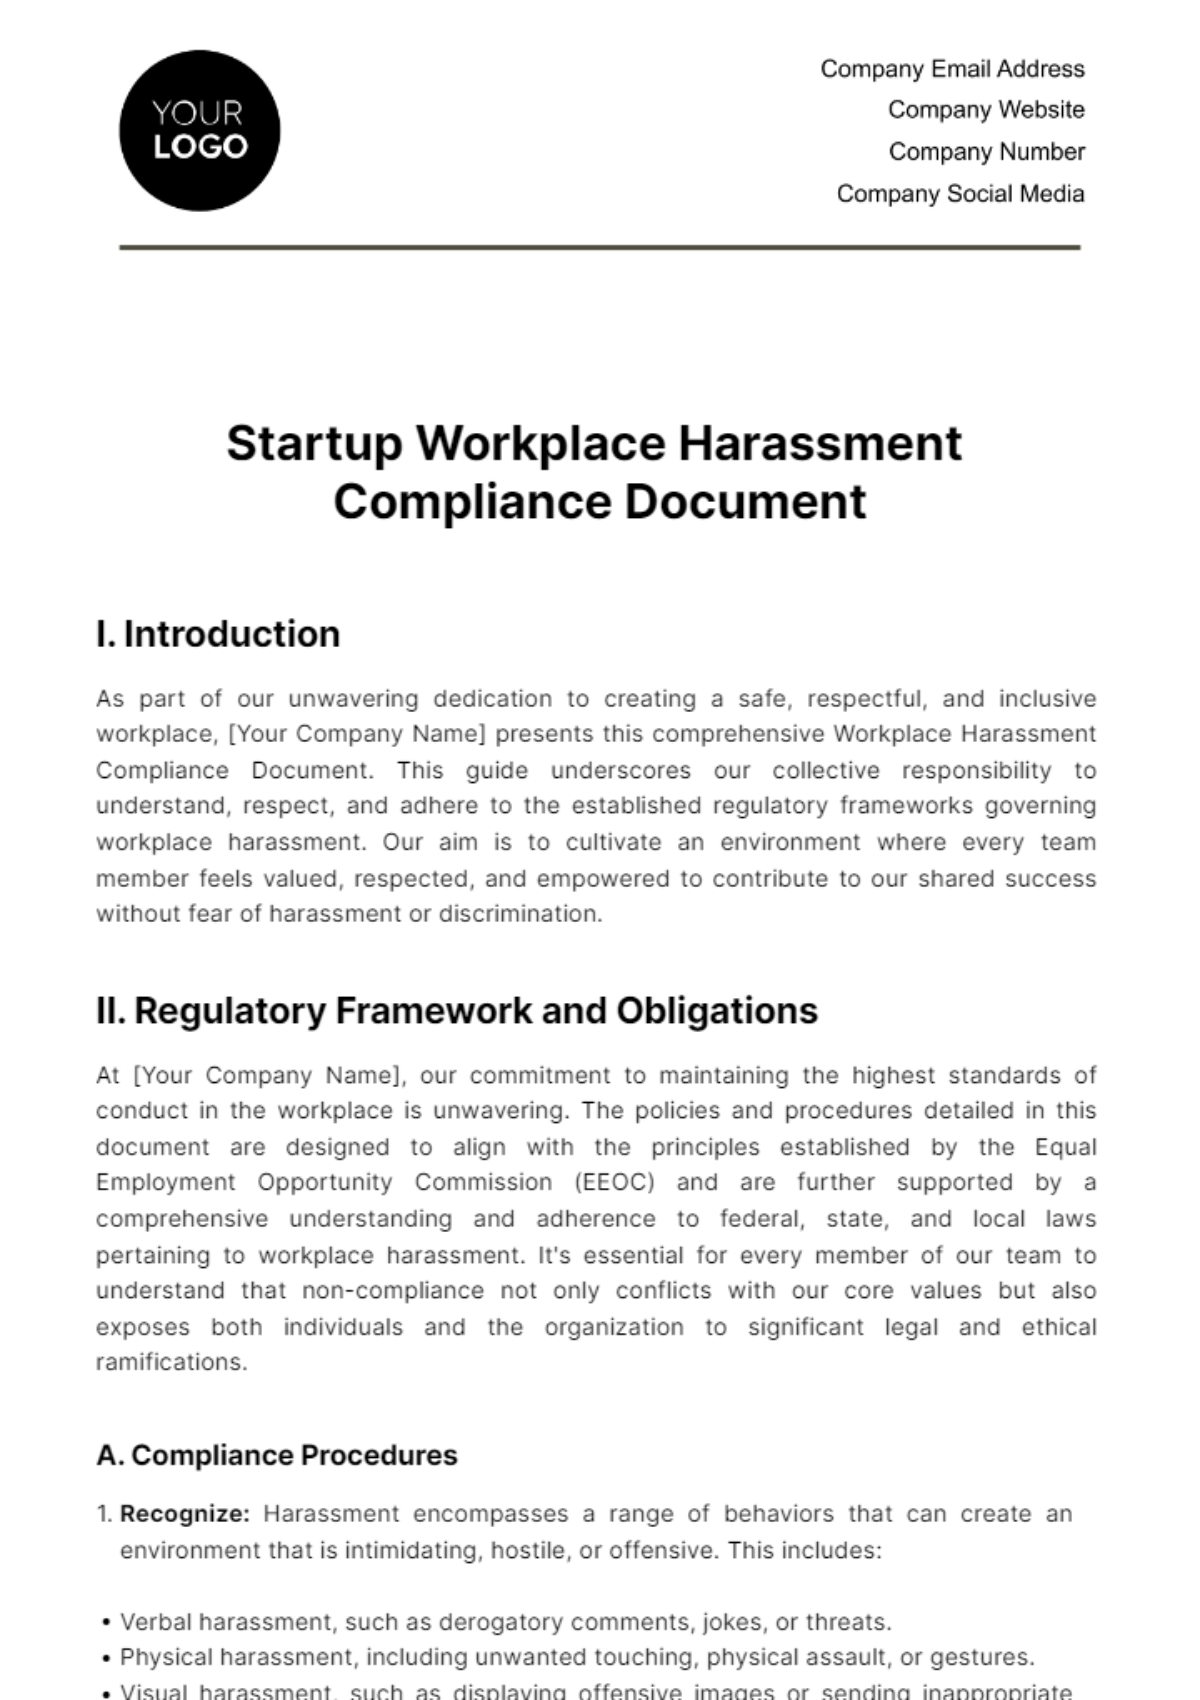 Startup Workplace Harassment Compliance Document Template